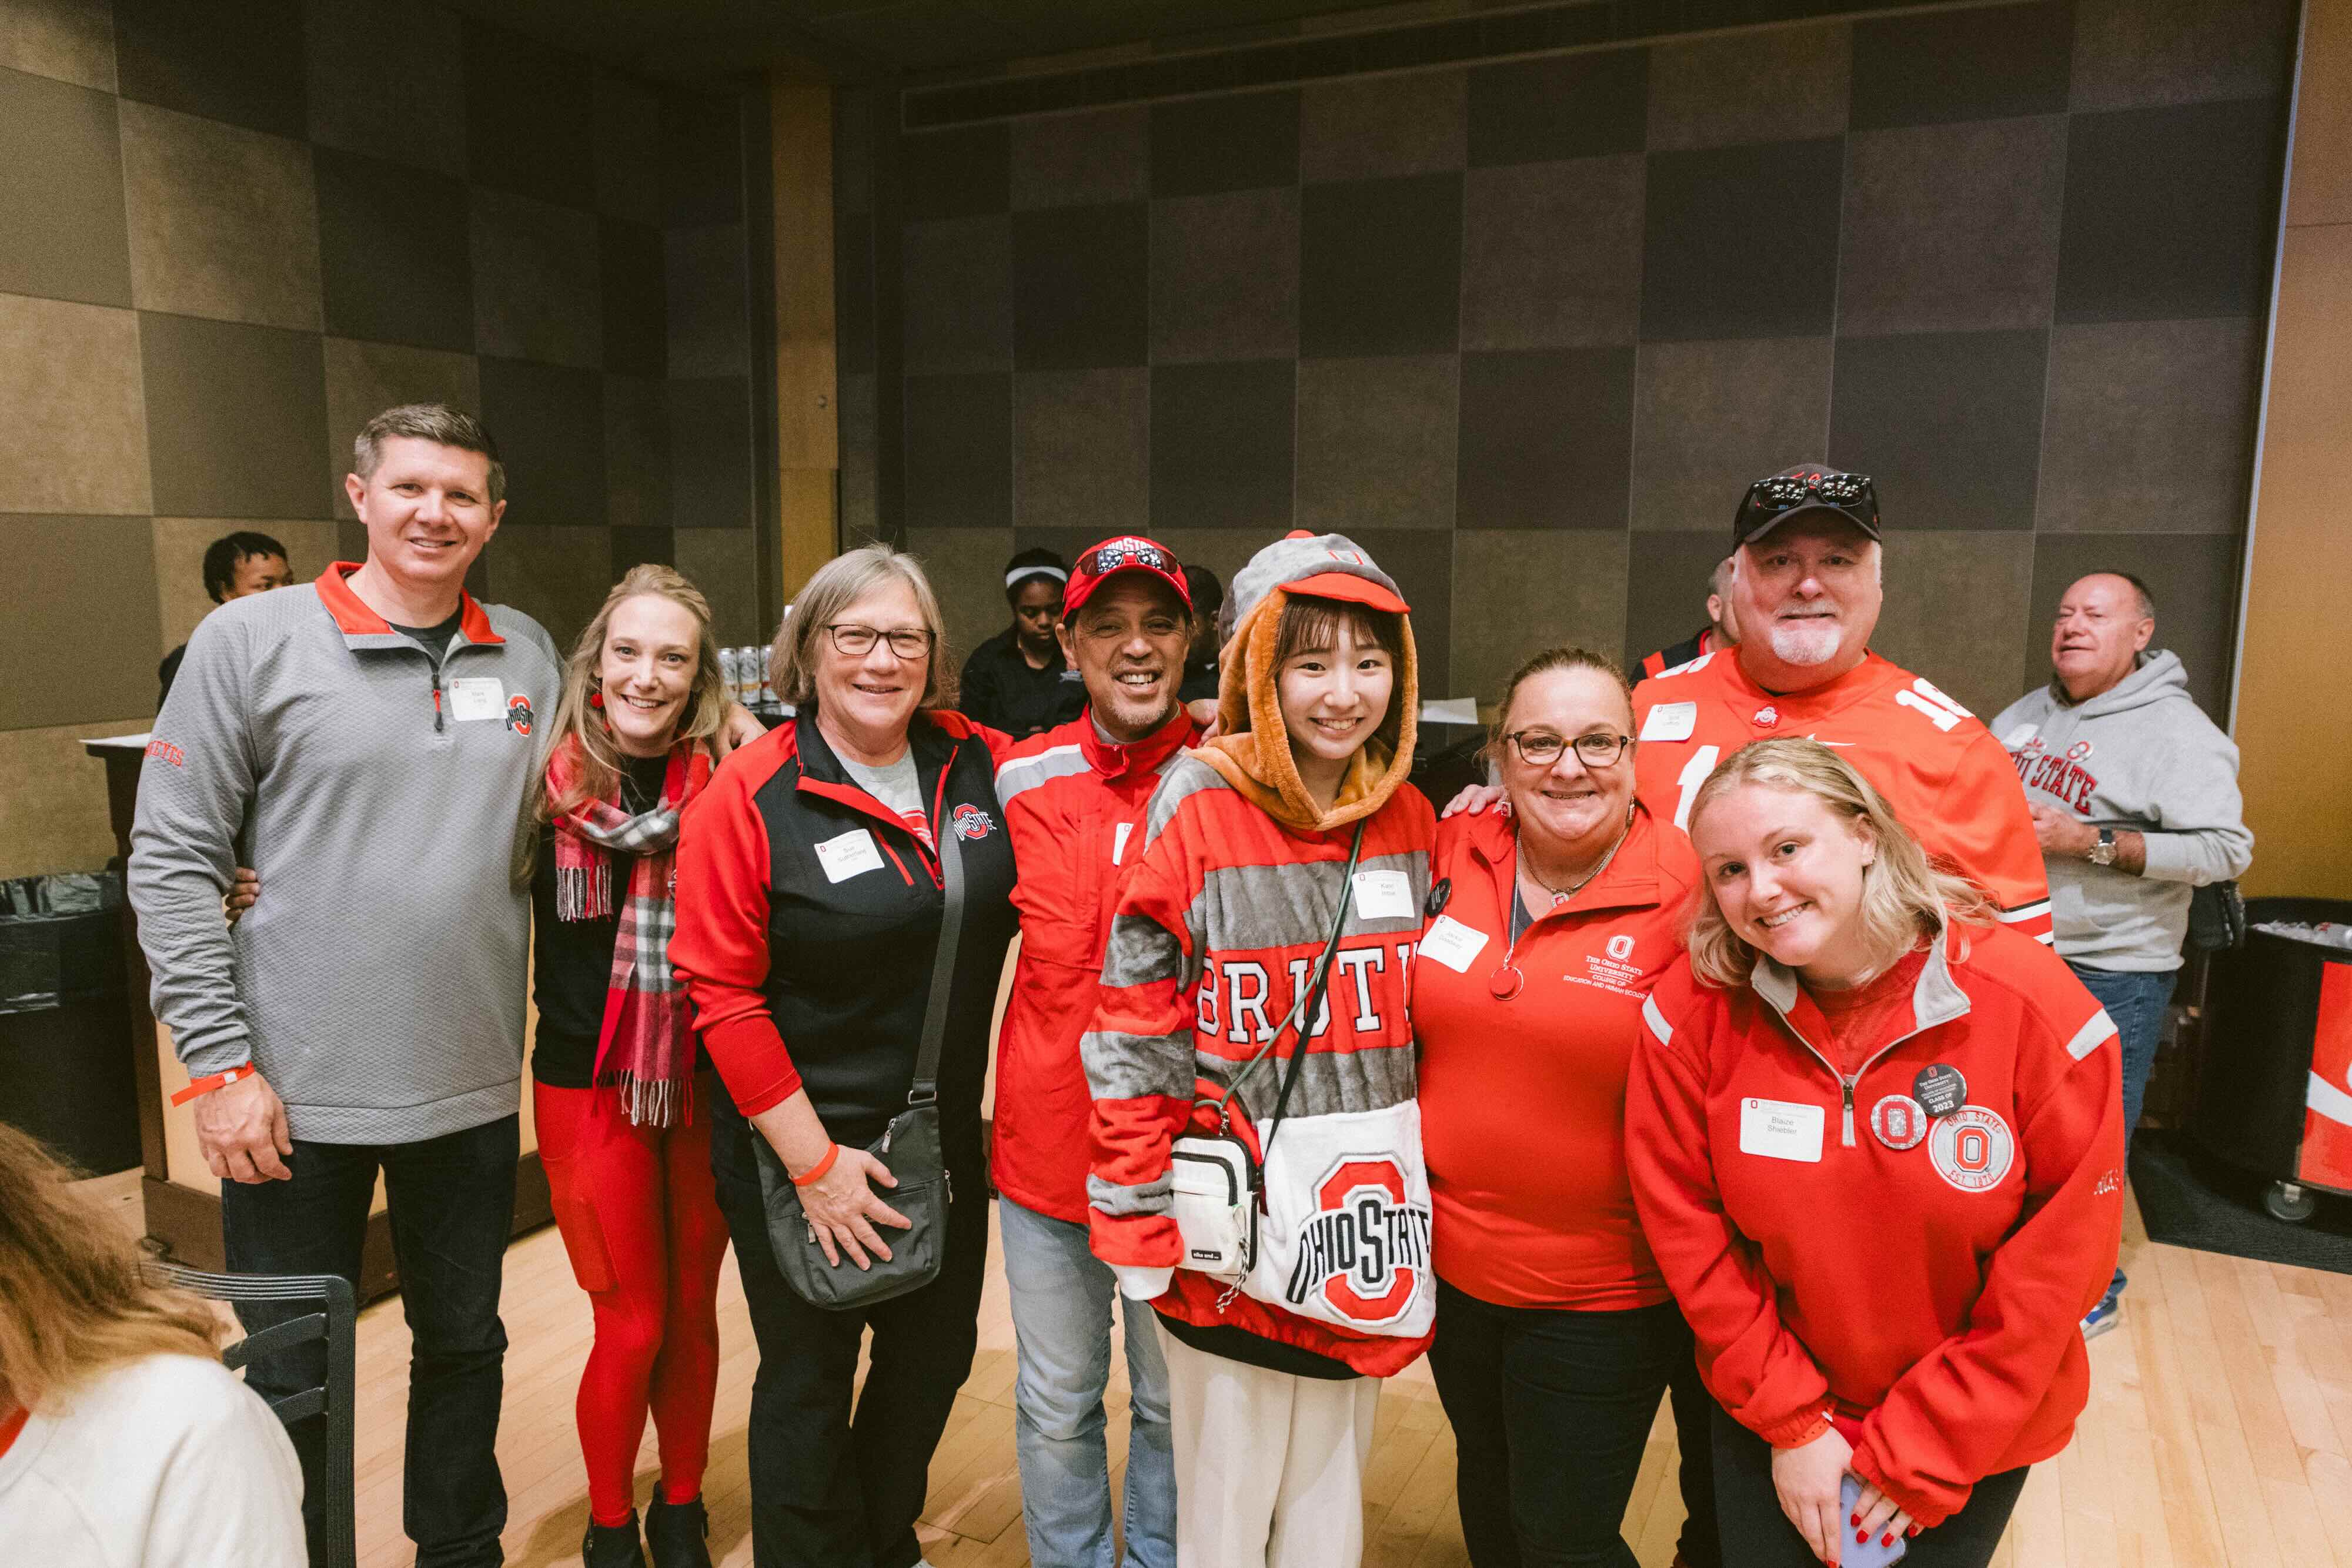 Ohio State alumni at a homecoming event